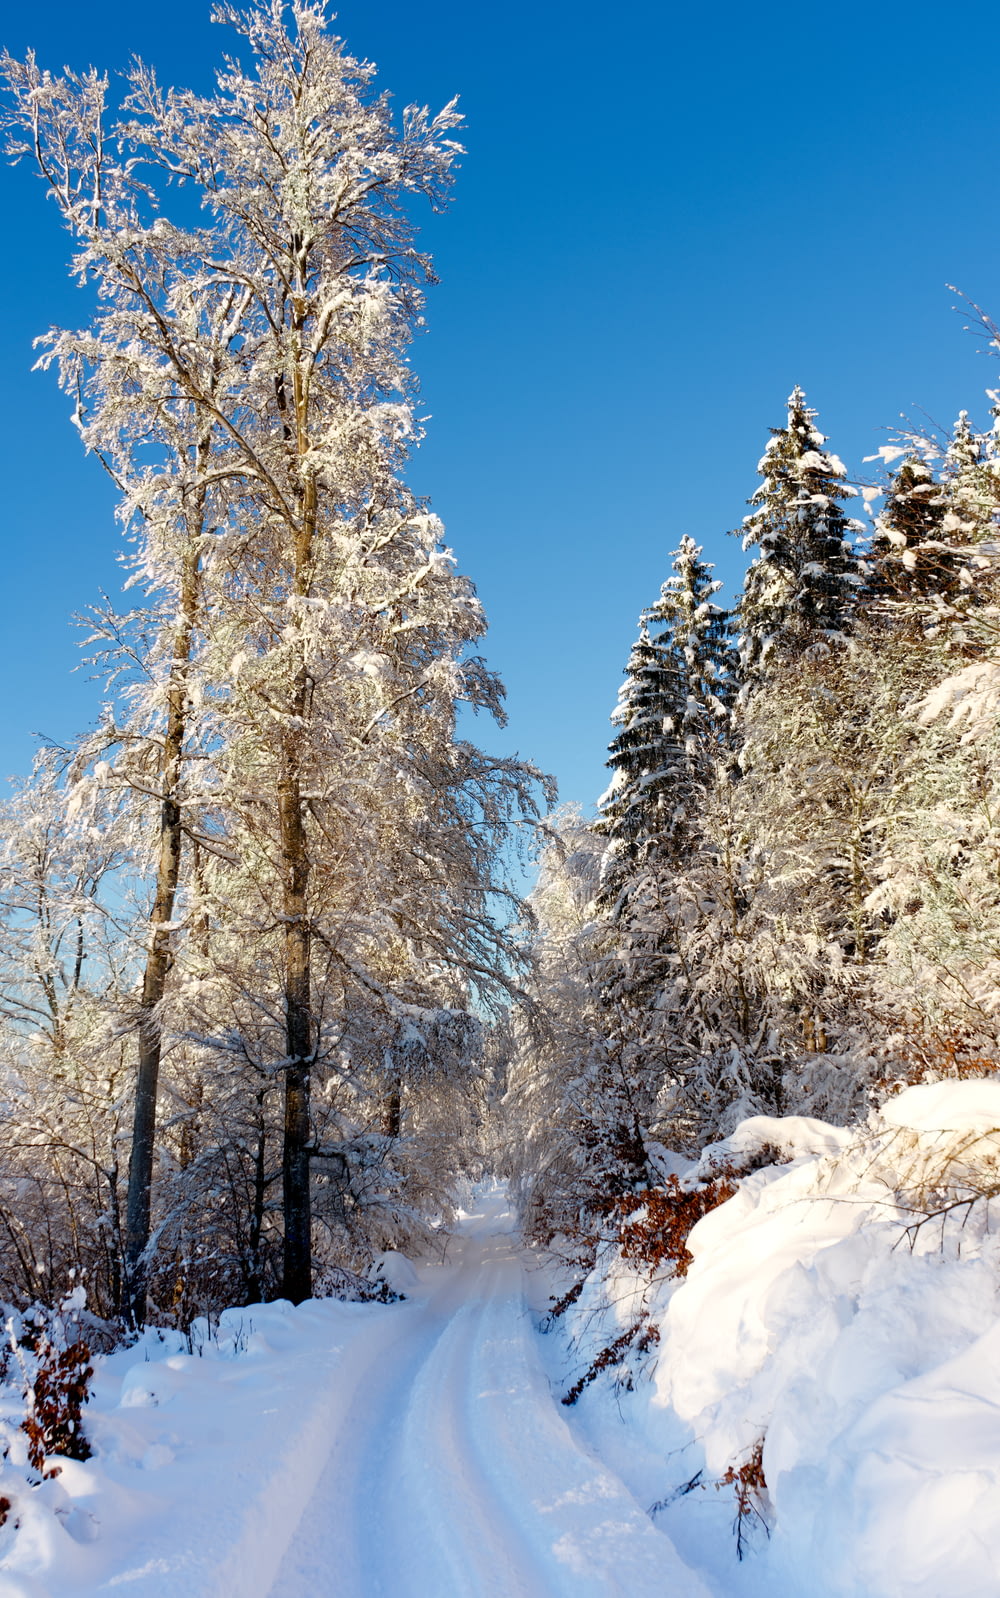 snow covered trees under blue sky during daytime